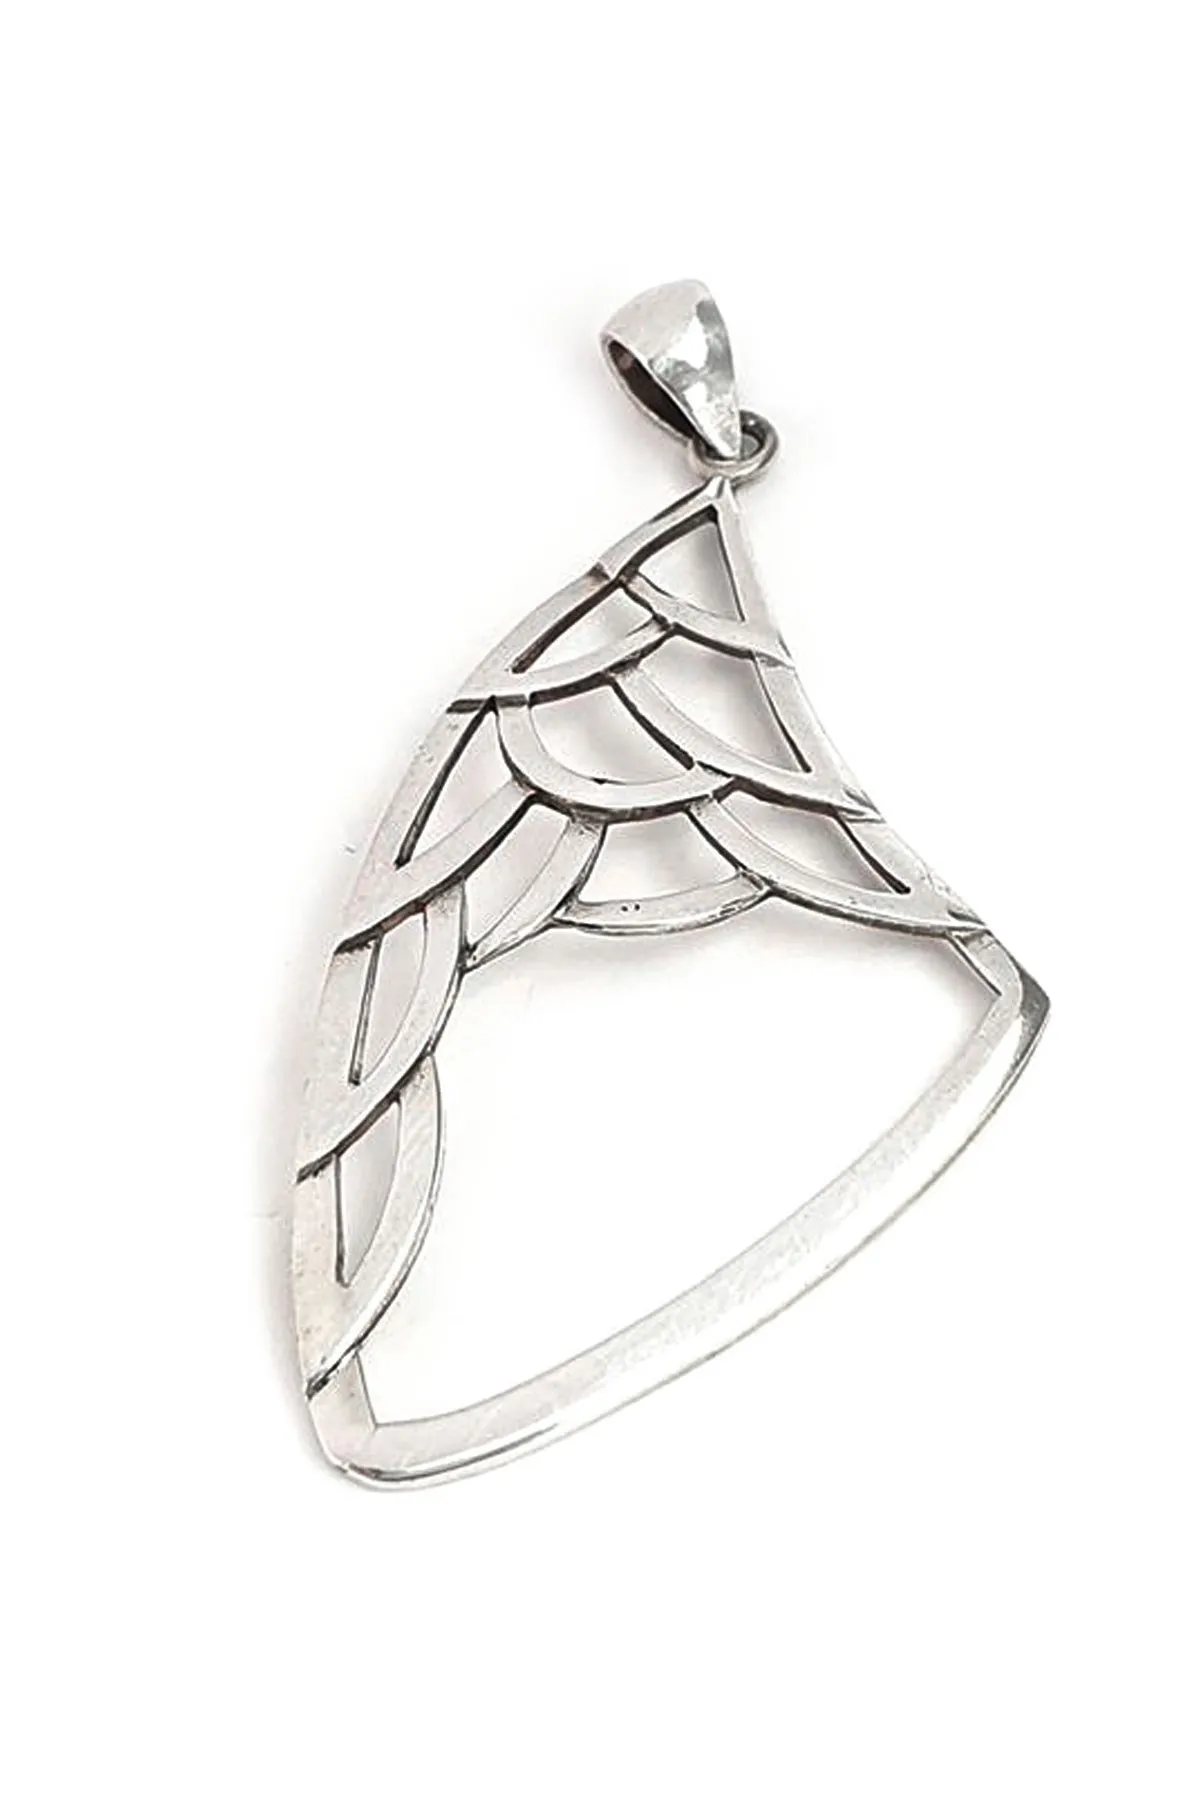 Buy Angel wing silver necklace on